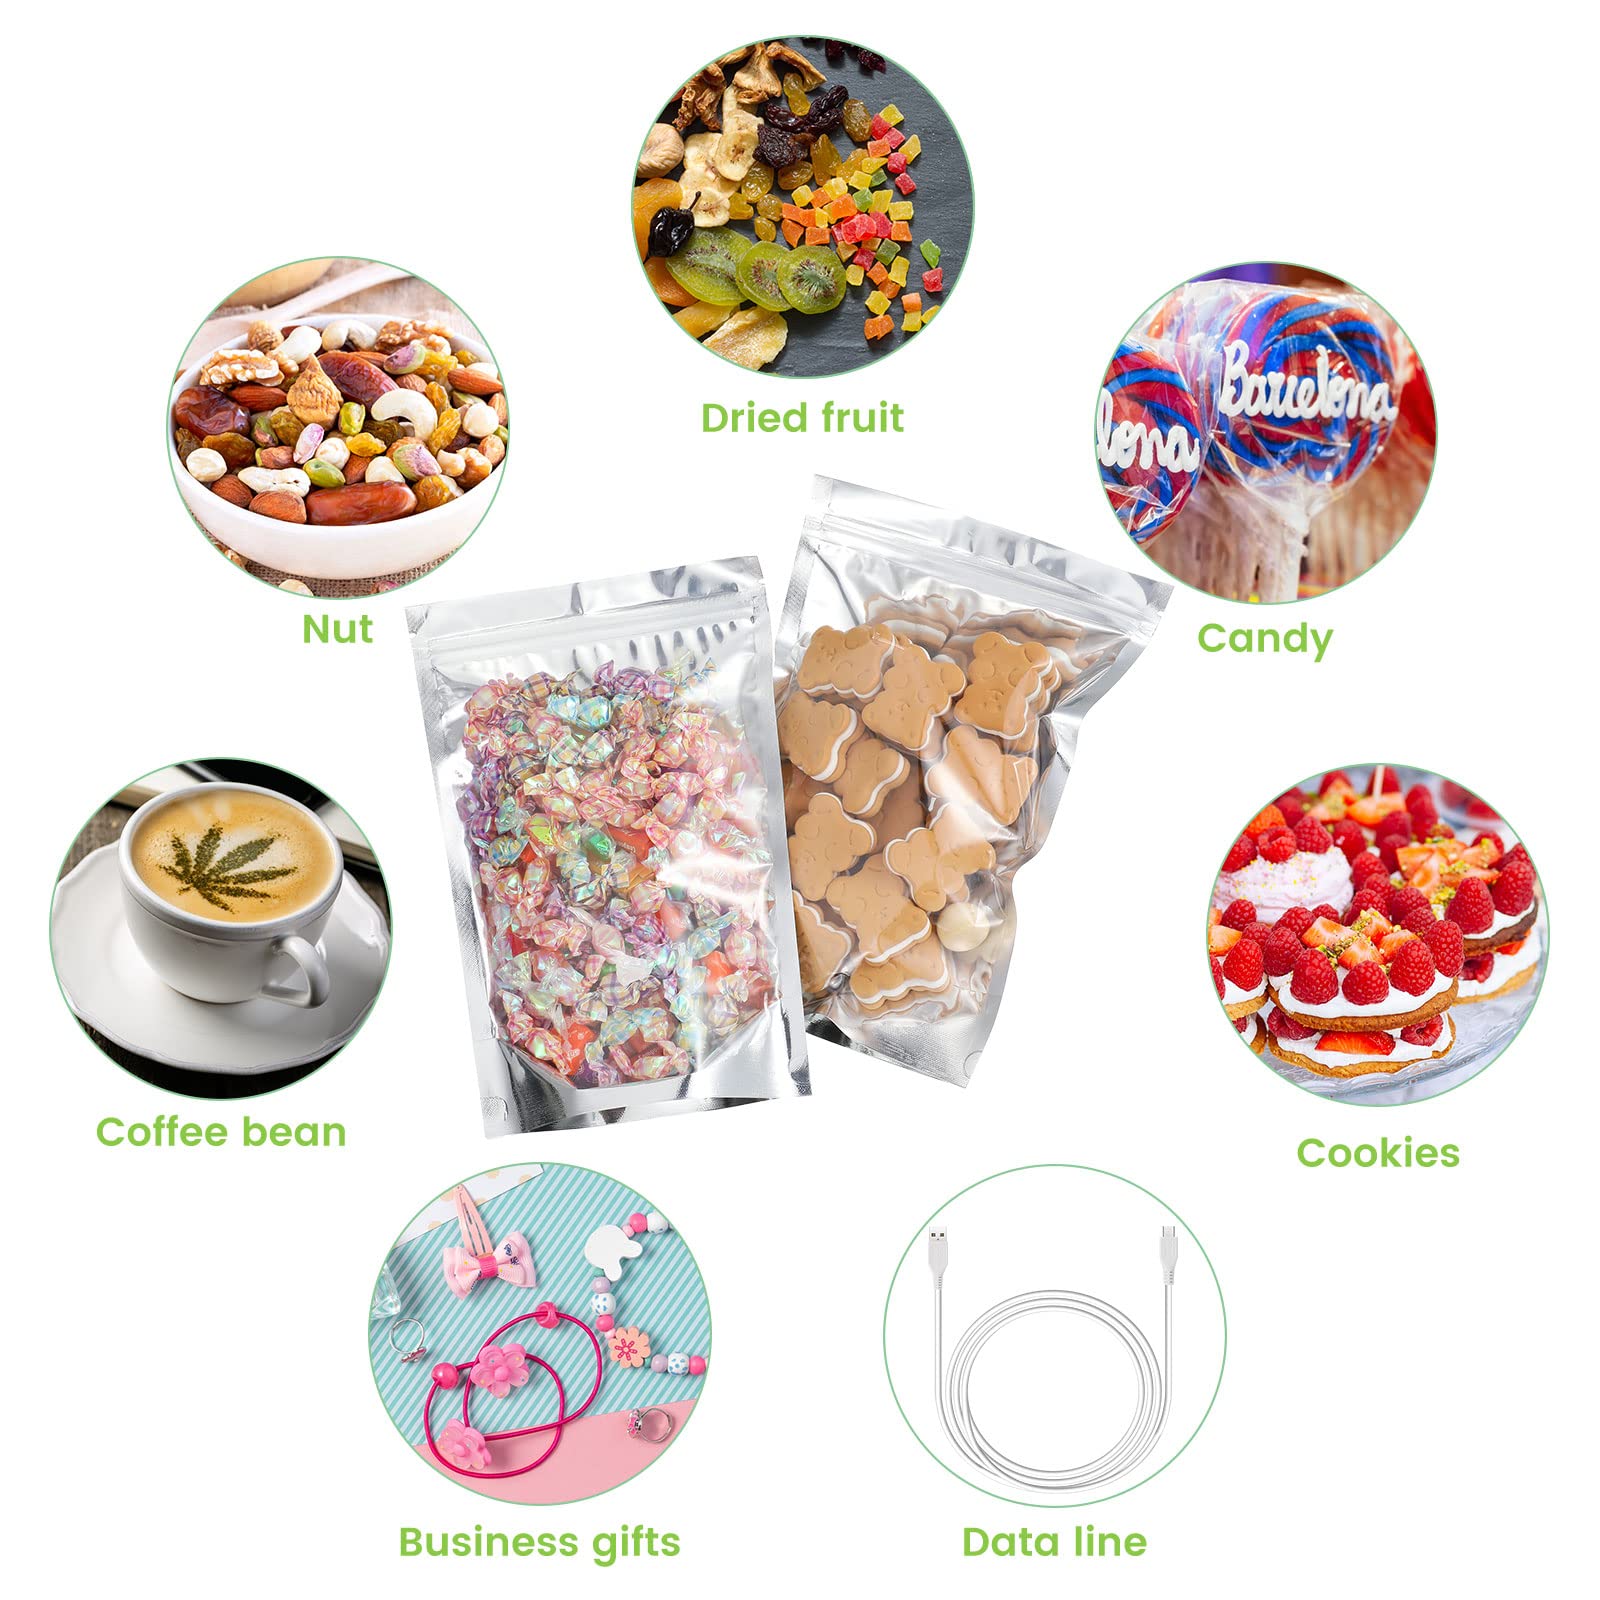 200 Pieces Resealable Polyester Film Bags Clear Front Polyester Film Bags Edible Packaging Bags Stand Up Aluminum Foil Seal Bags Stand Up Bags